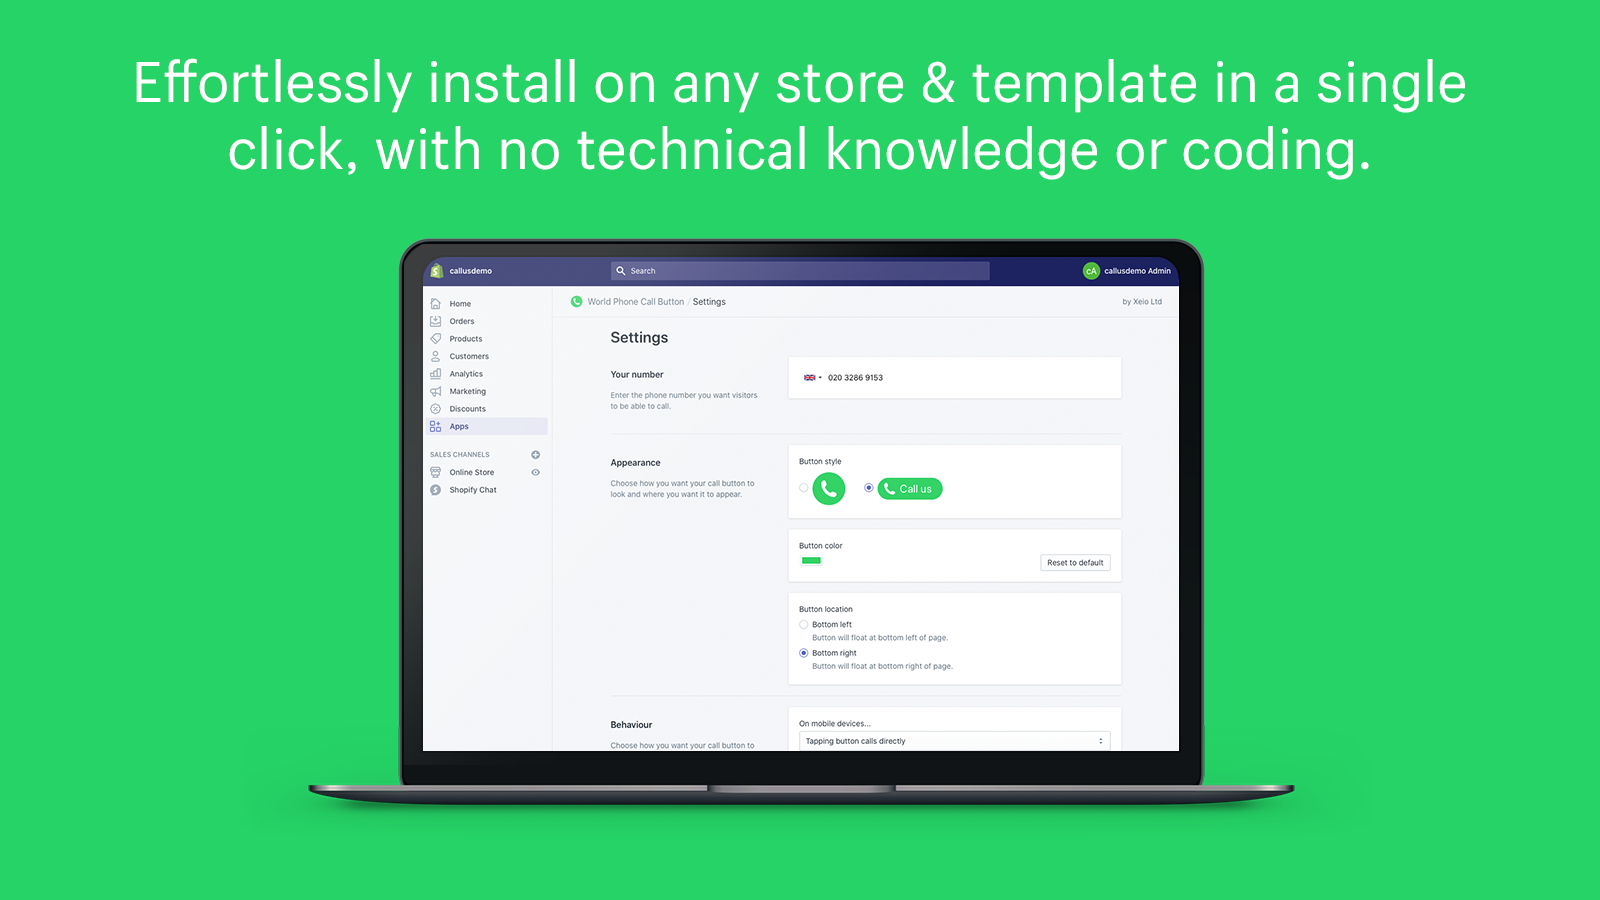 Effortlessly install on any store or template in a single click